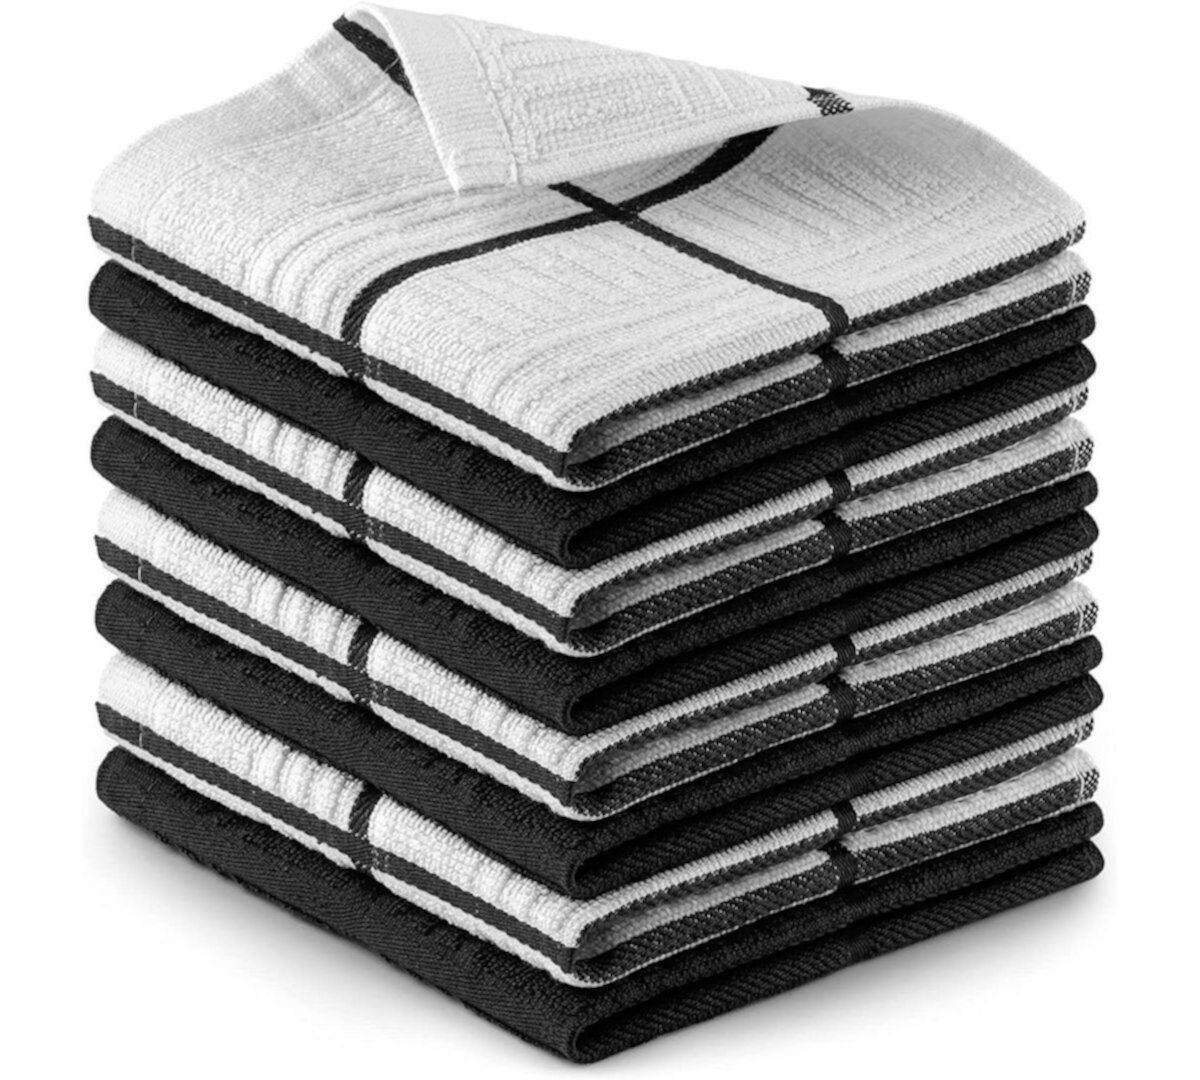 Absorbent Kitchen Towels Cotton Zulay